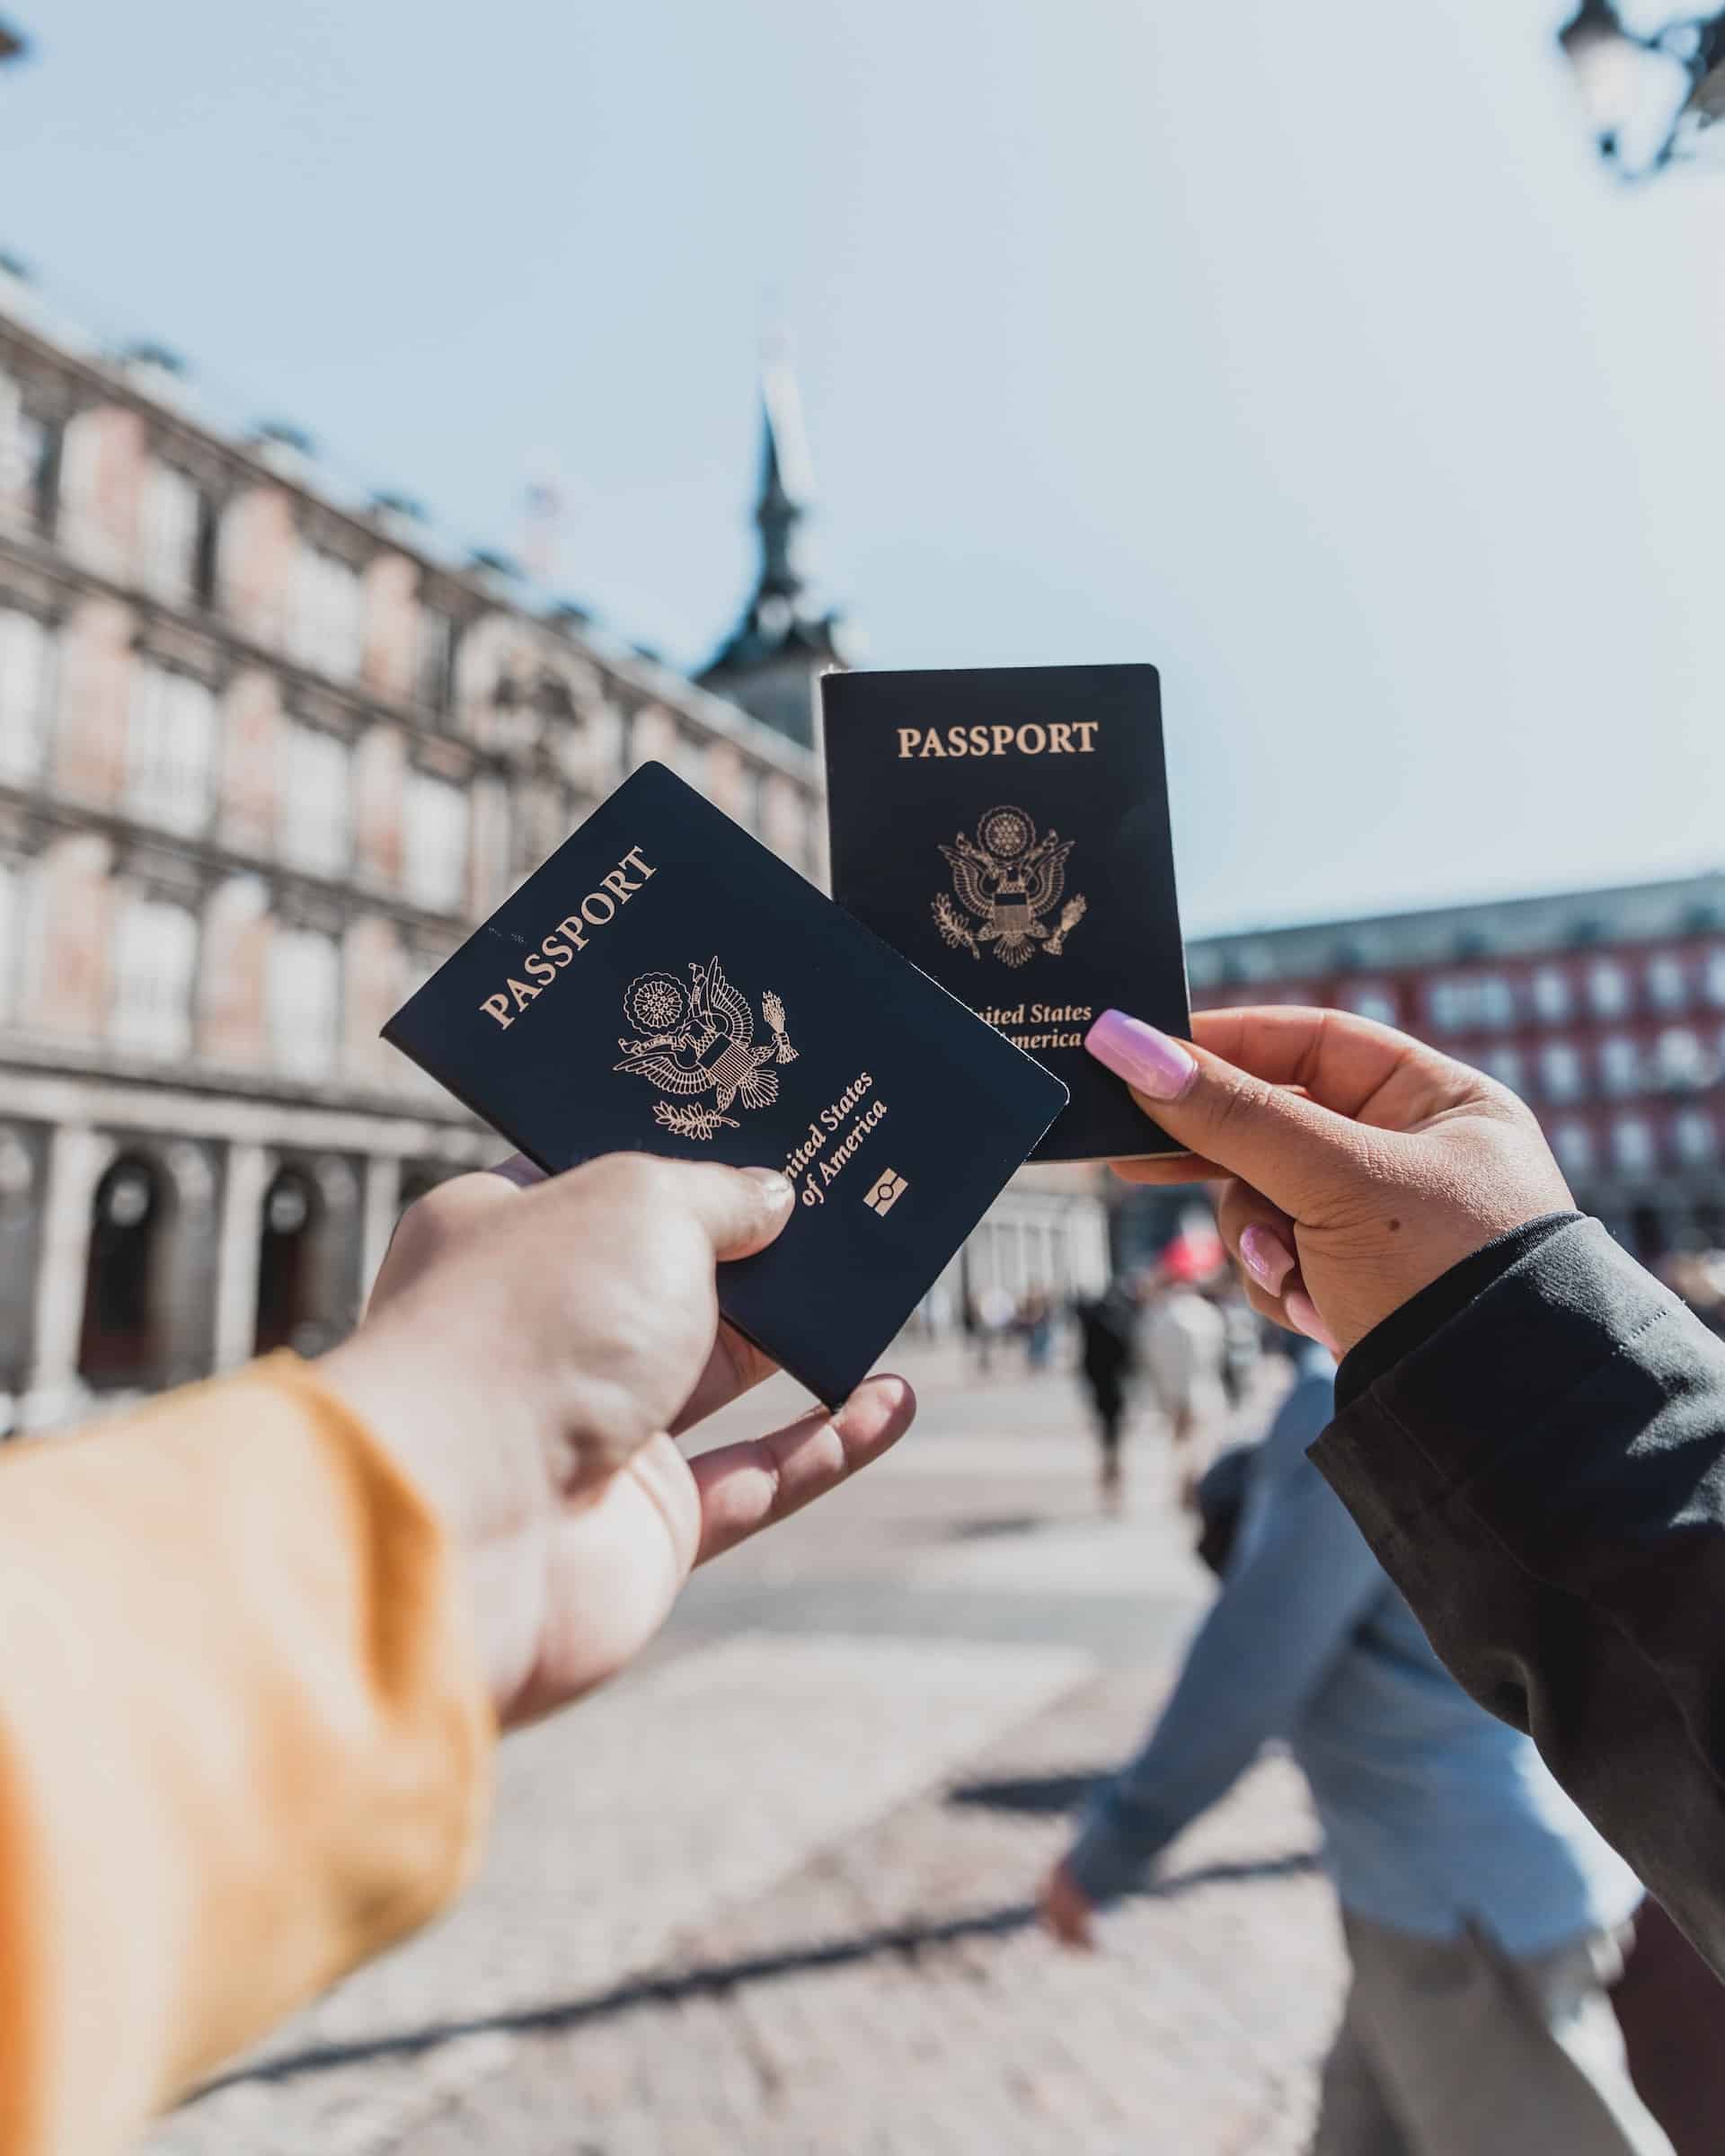 Visa requirements are an important part of the matching process as it is what will determine whether the au pair can successfully arrive and au pair in the host country.